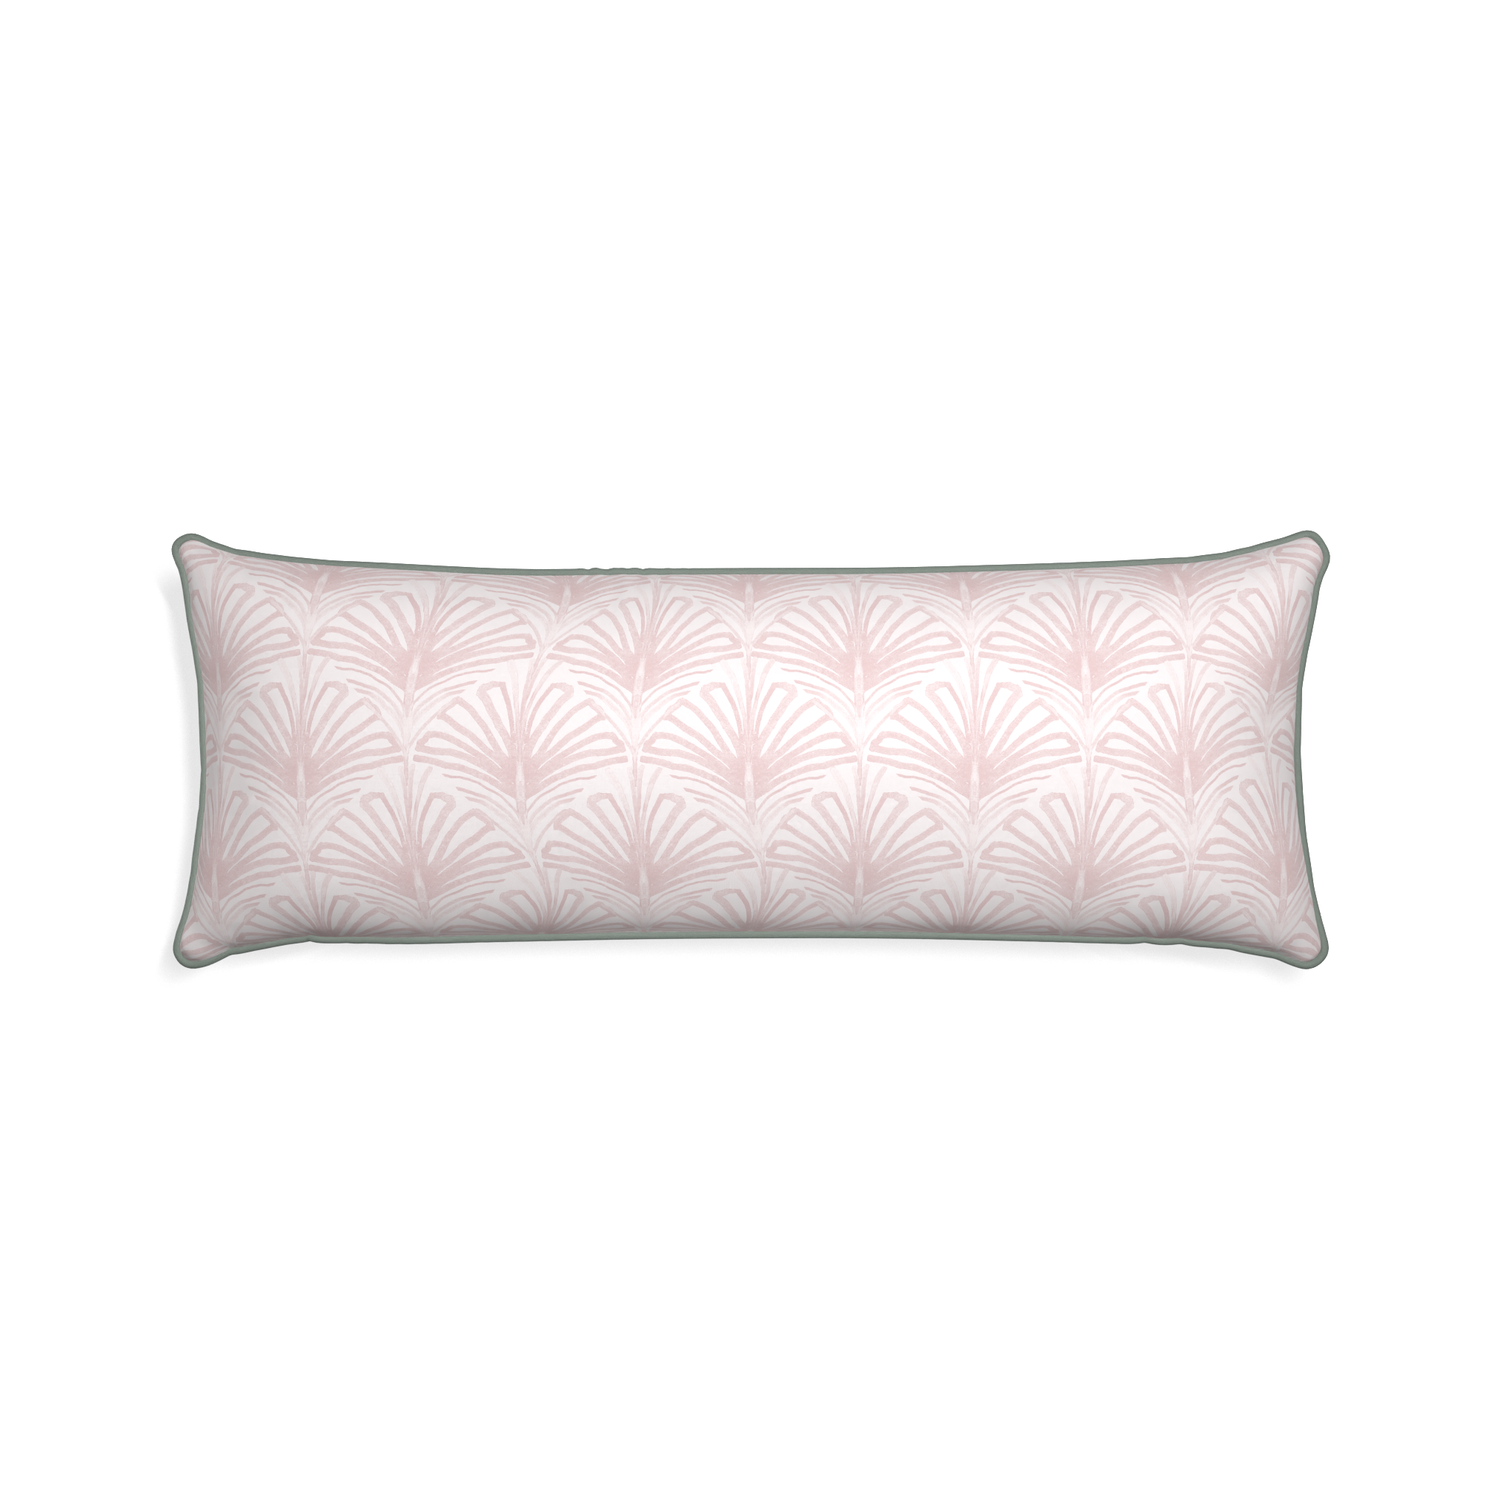 Xl-lumbar suzy rose custom rose pink palmpillow with sage piping on white background